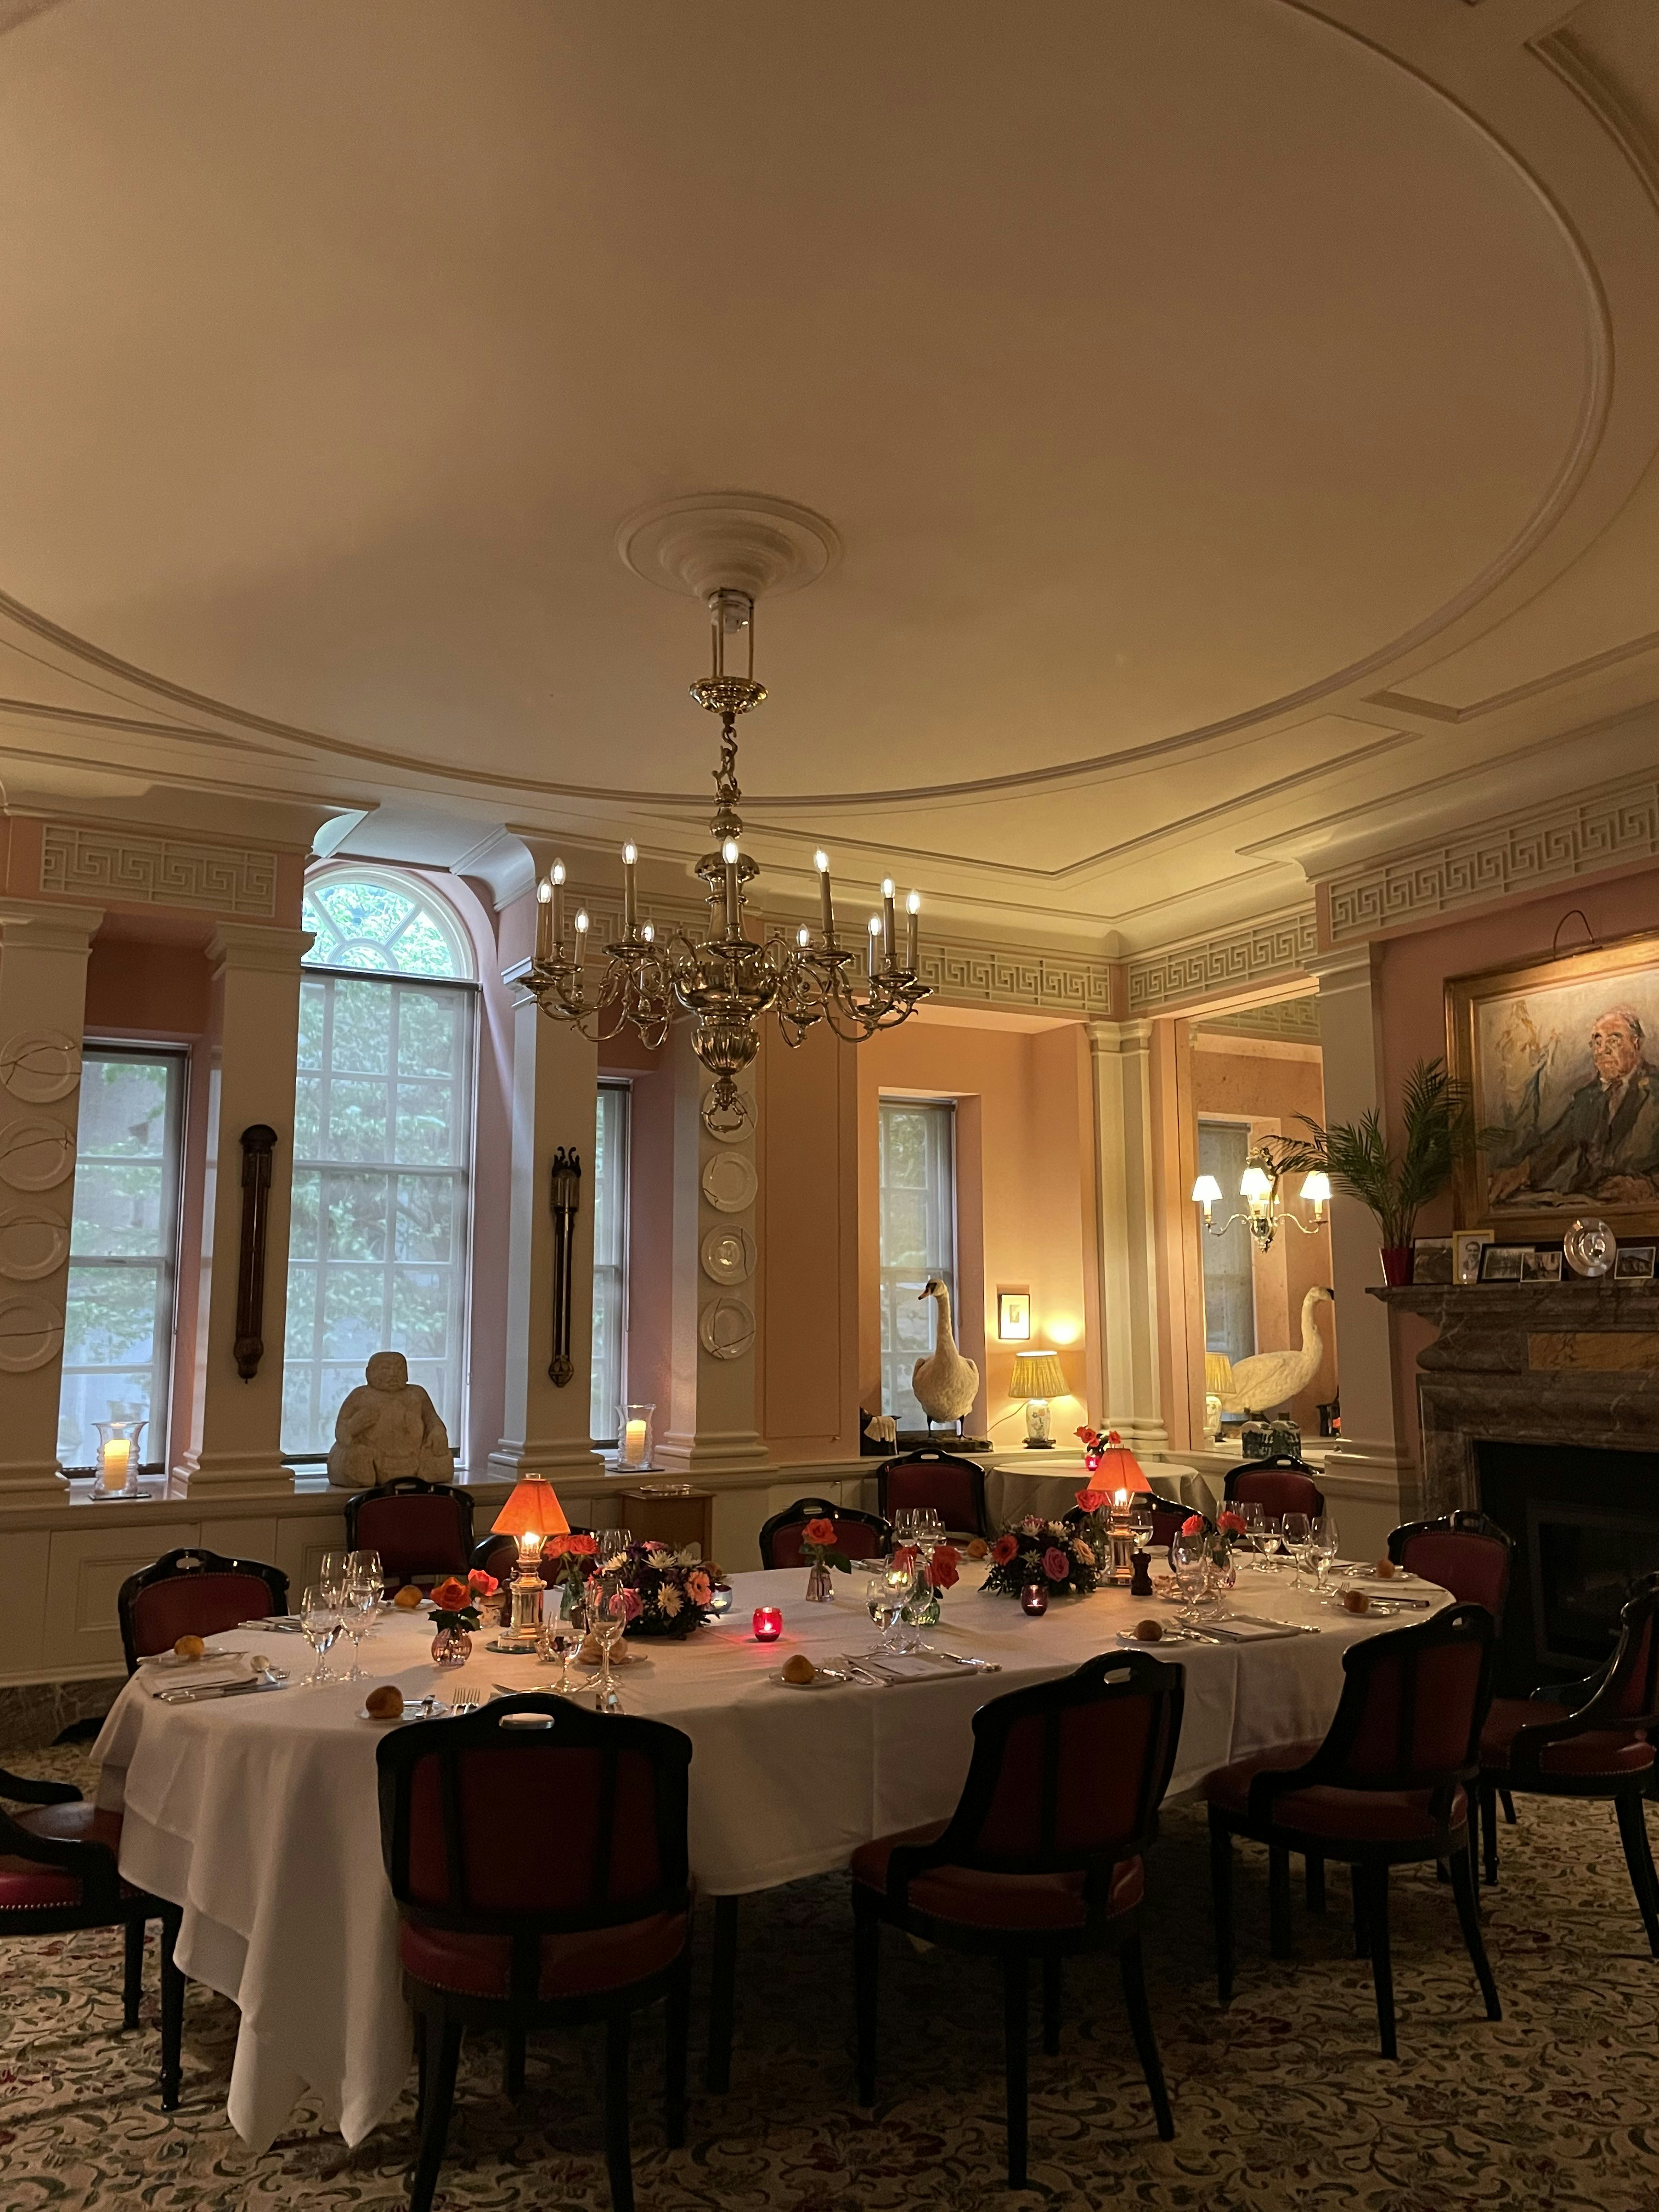 The Walbrook Club - Main Dining Room image 9